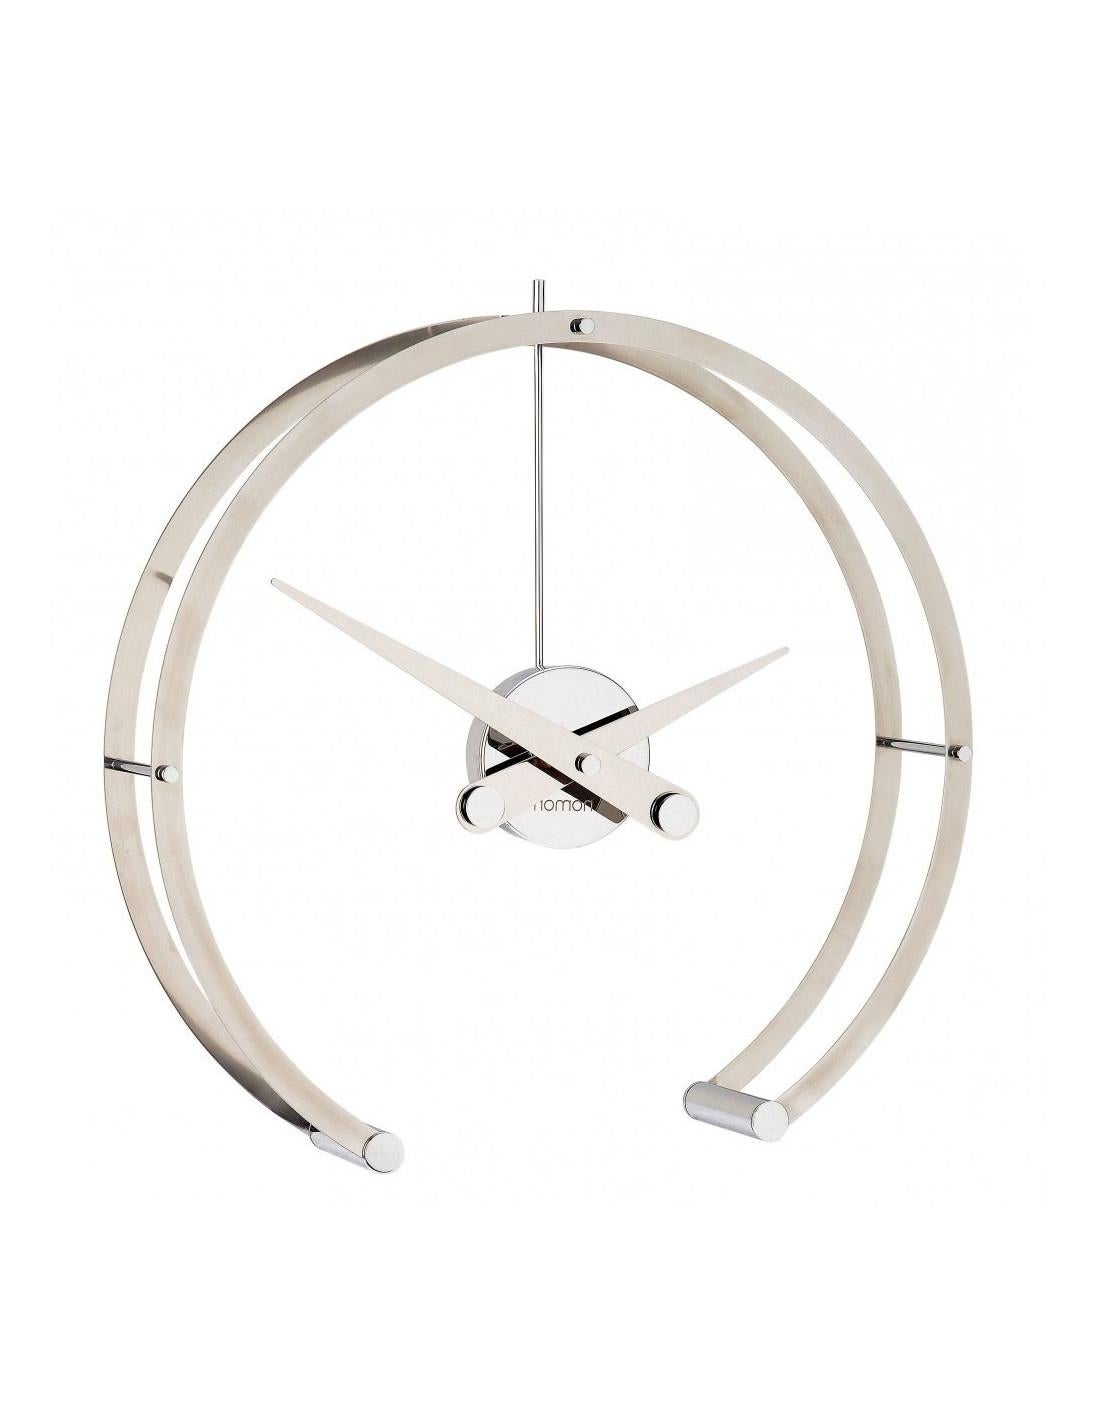 The Omega I Clock impresses by keeping a clock suspended in the air while losing its depth by removing unnecessary items and making it simple and glamorous .
Omega i table clock : Rings and hands in stainless steel, box in chromed brass.
Each